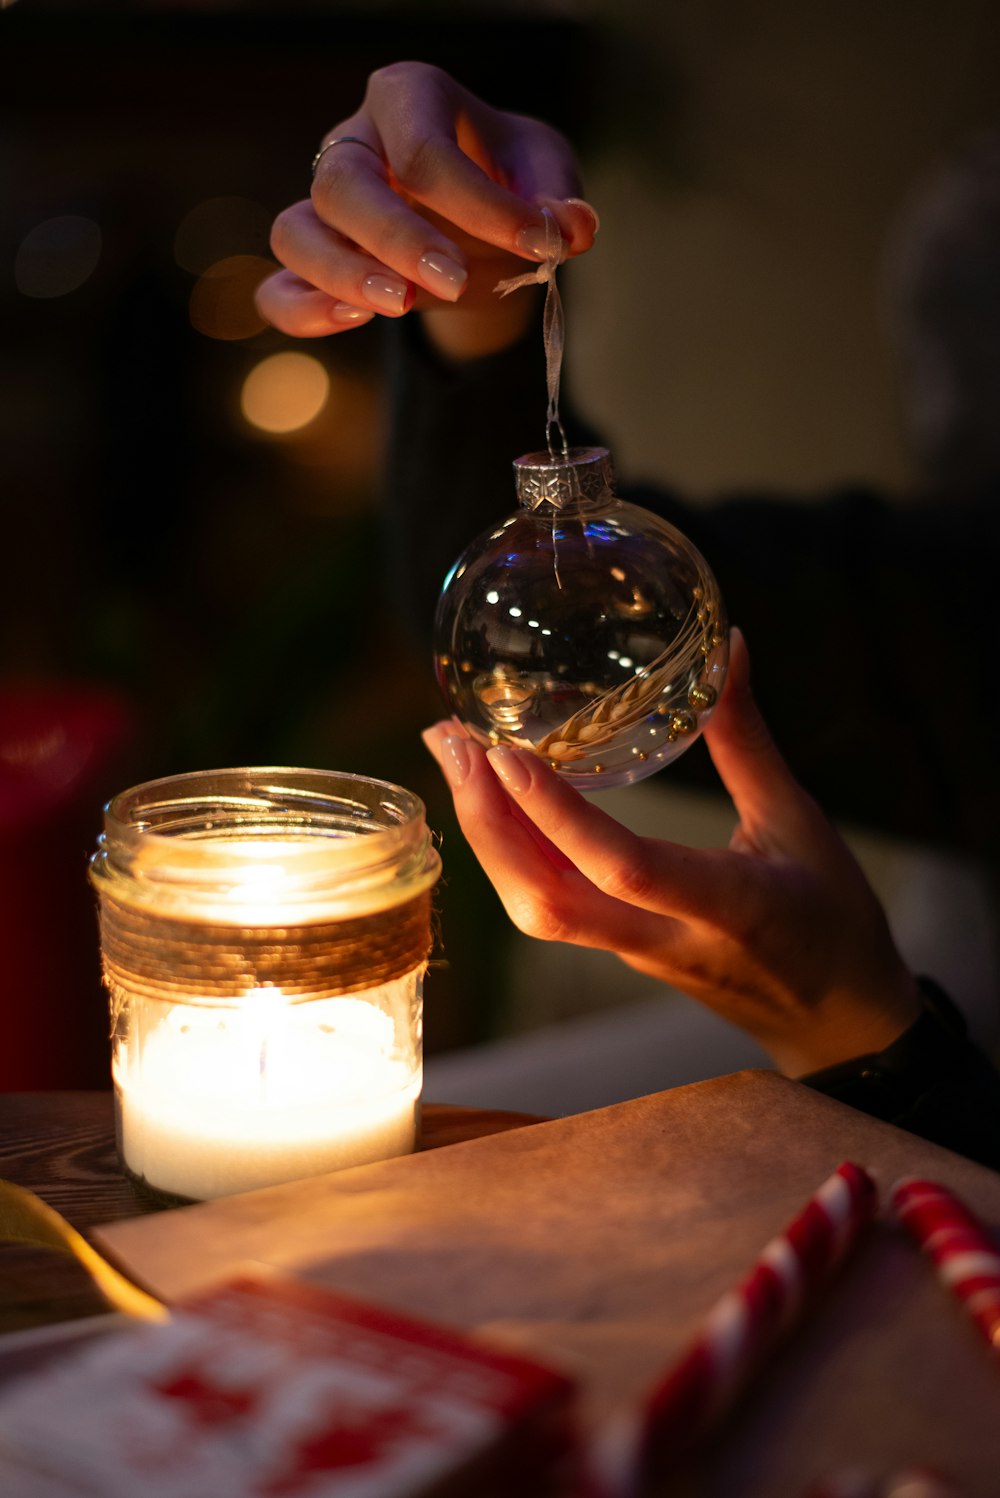 a person holding a glass ornament over a jar of candy canes